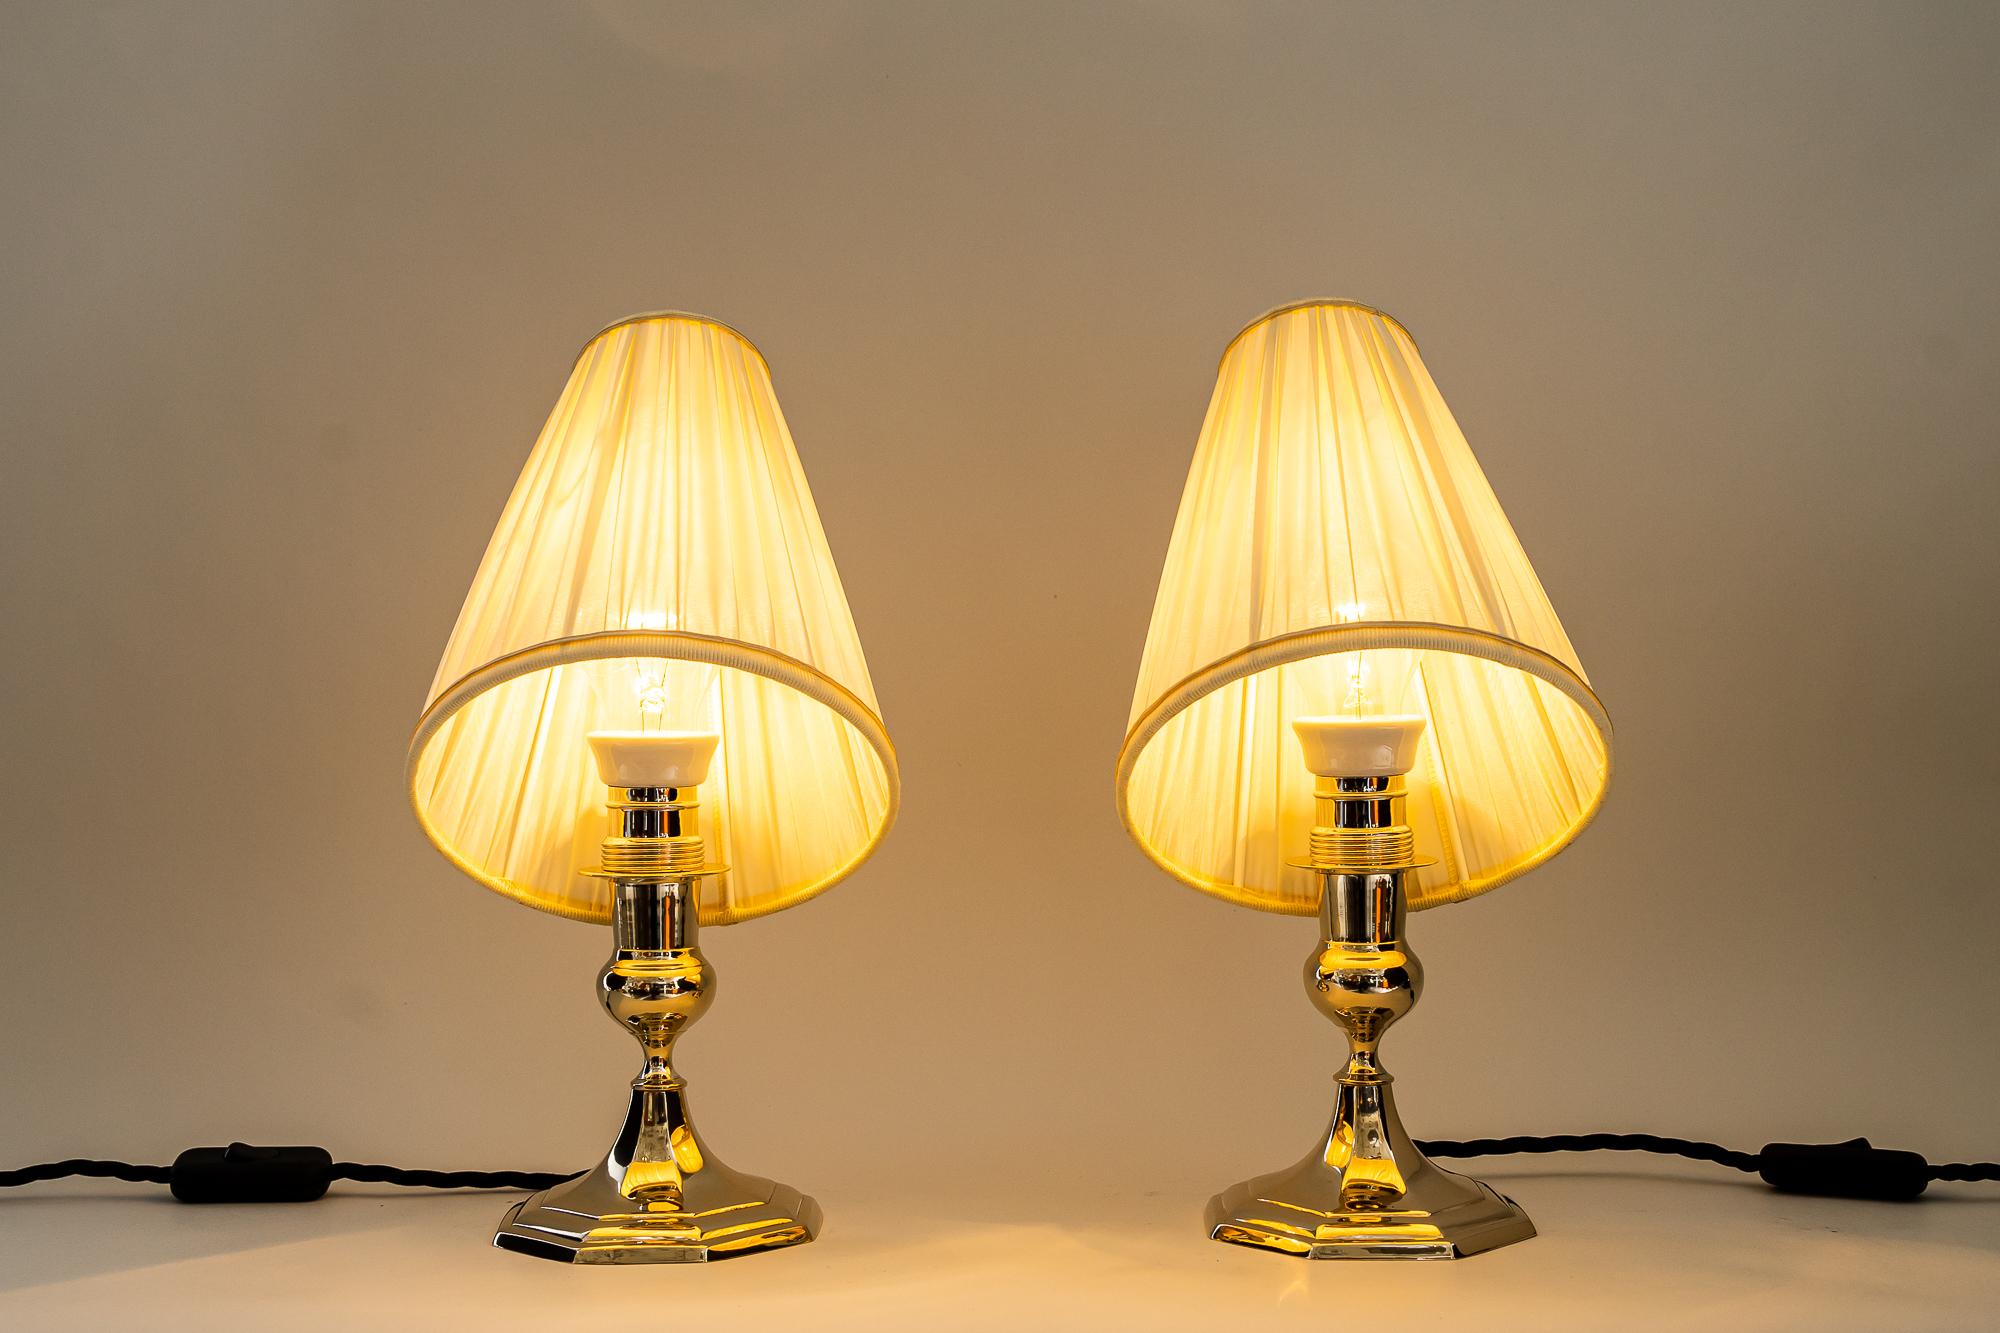 2 Art Deco Table Lamps with Fabric Shades, Vienna, Around 1920s  For Sale 3